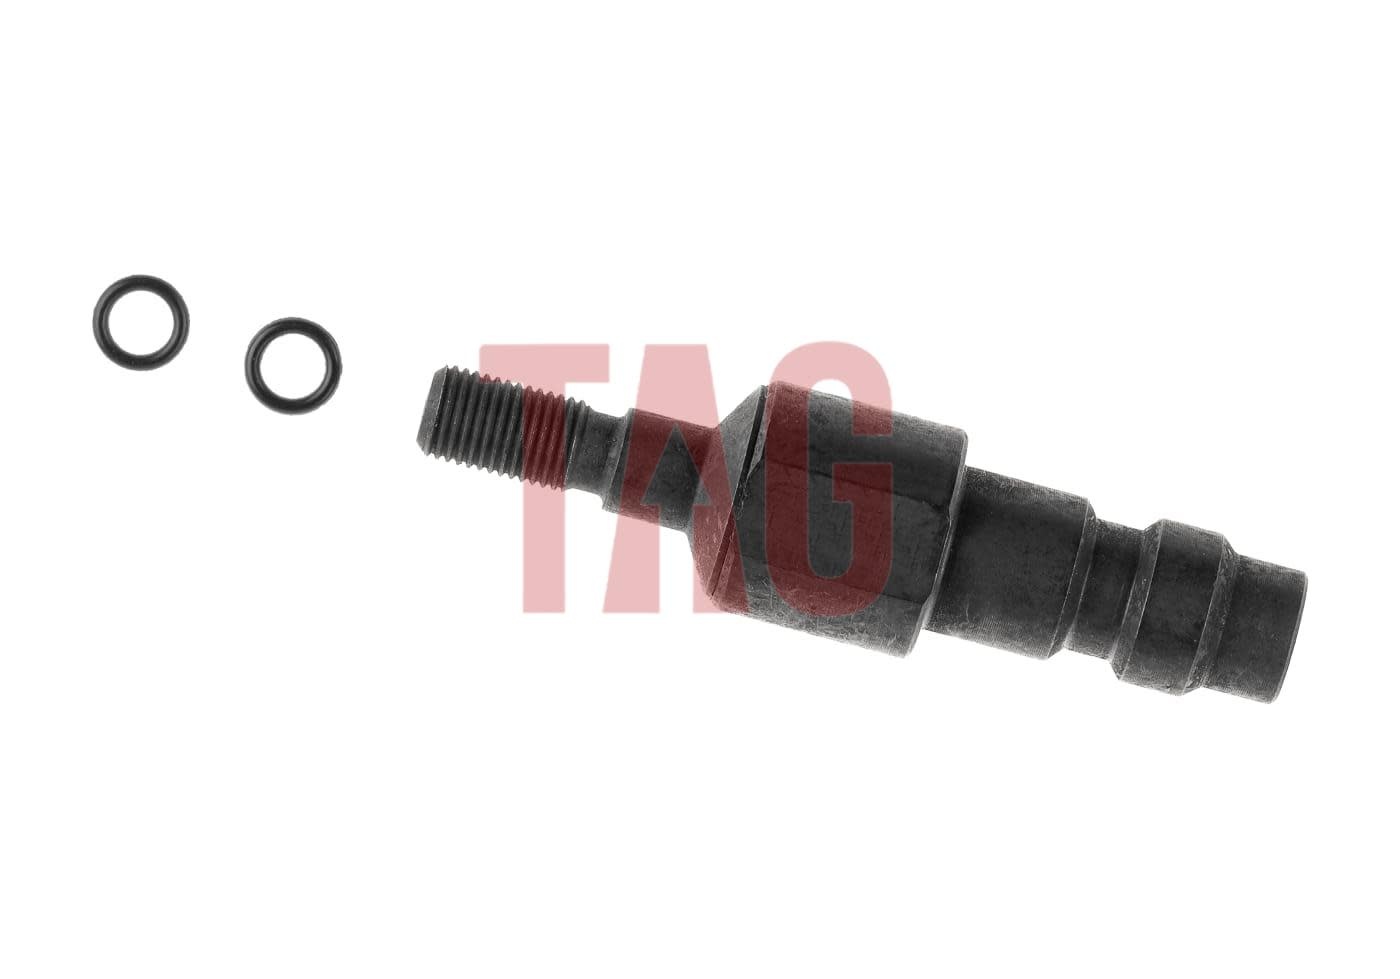 EPeS HPA Self Closing Adaptor for GBB TM/TW Thread